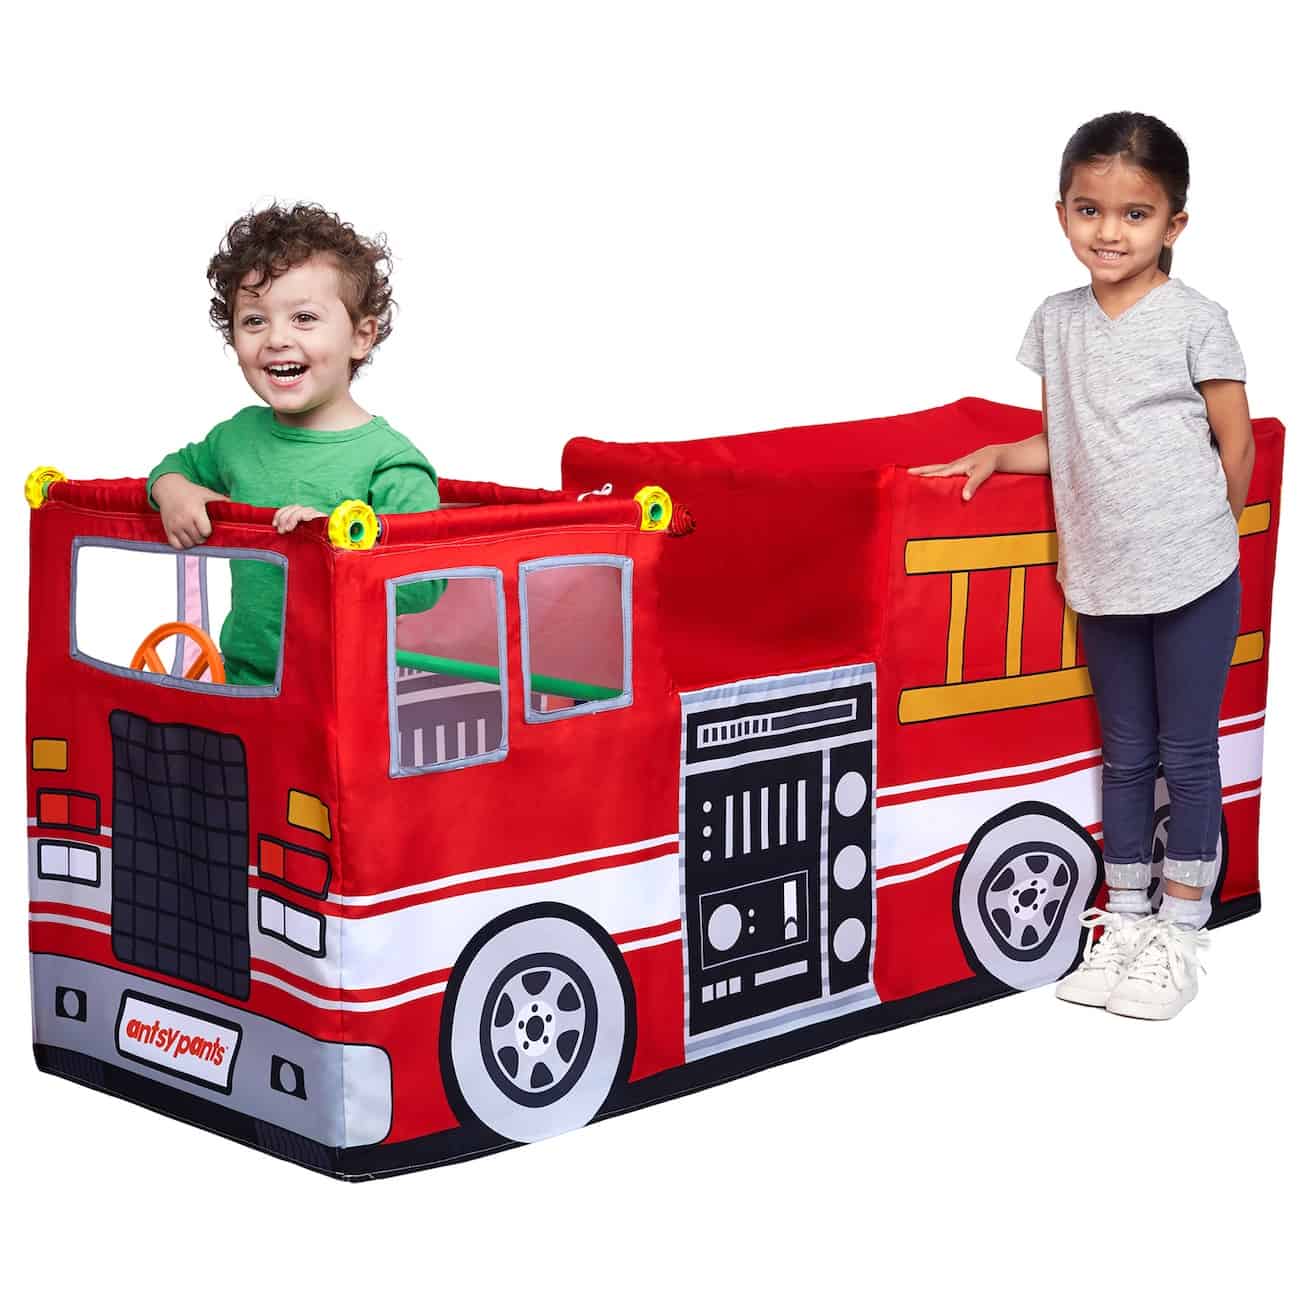 antsy pants build and play fire truck review